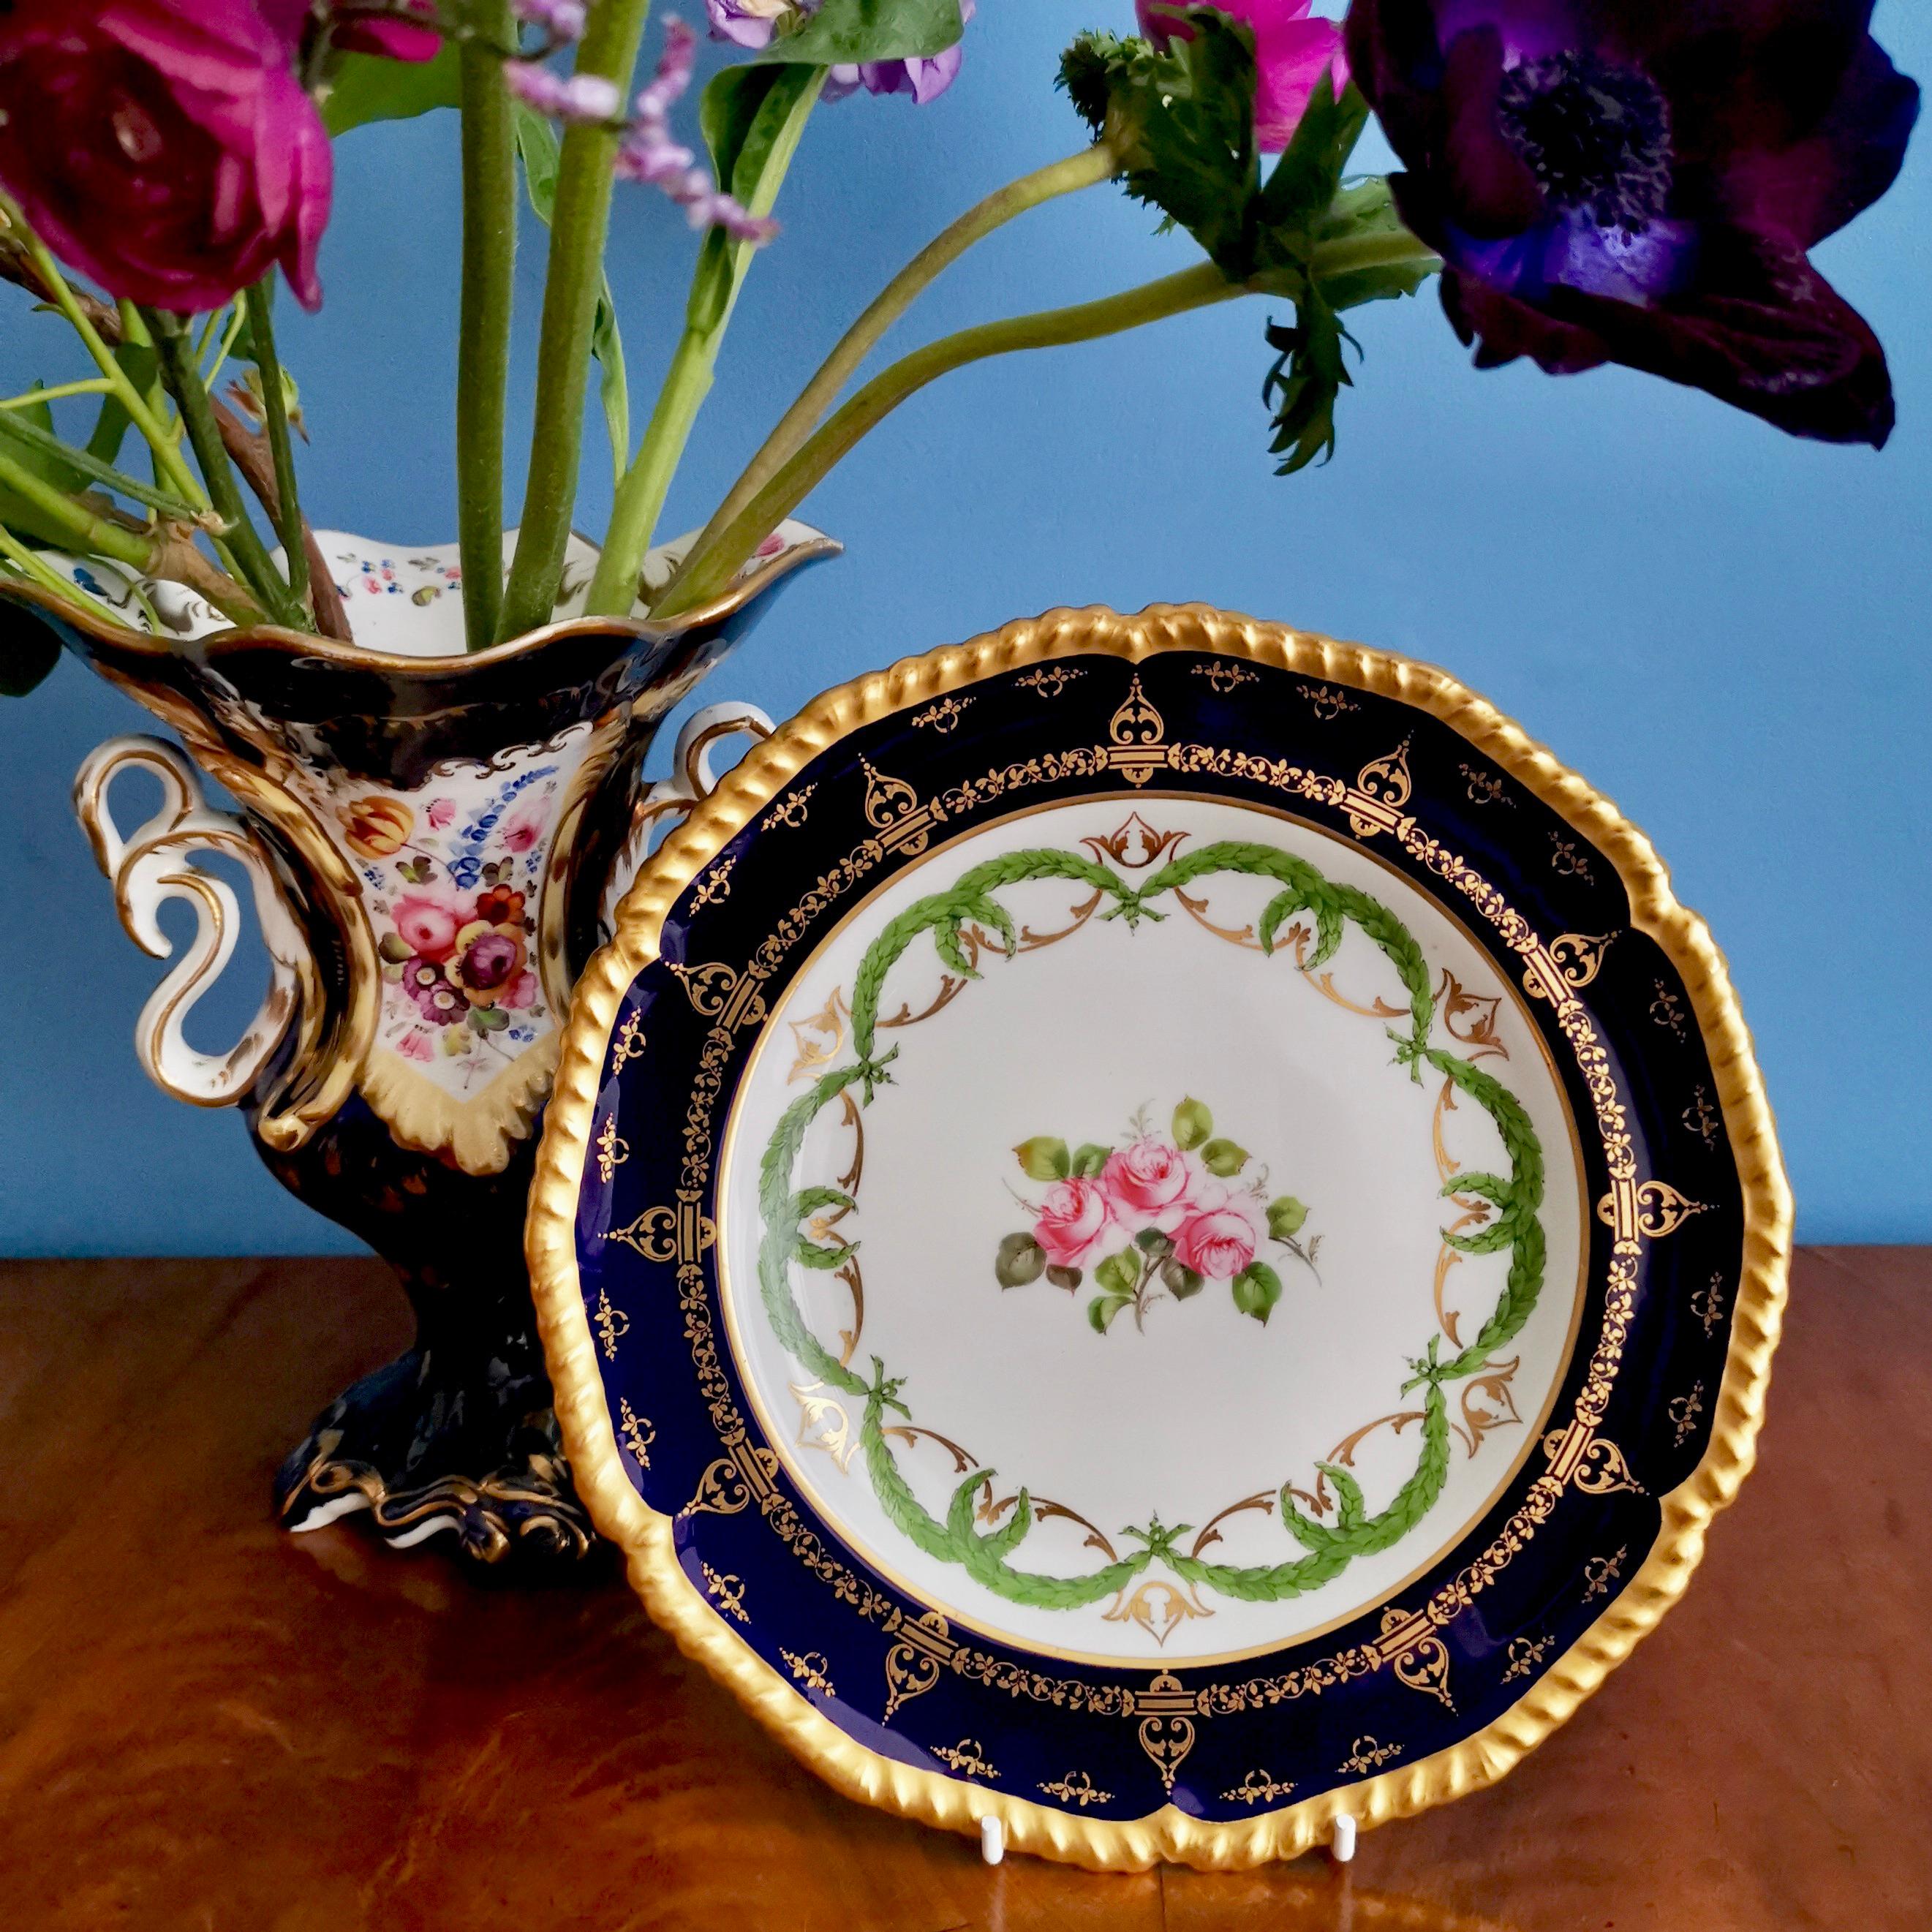 This is a beautiful dessert plate made by Royal Crown Derby in 1907. The plate has a deep cobalt or mazarine blue ground with rich gilt decorations, green garlands and some finely painted Billingsley roses in the centre.

The Derby Porcelain